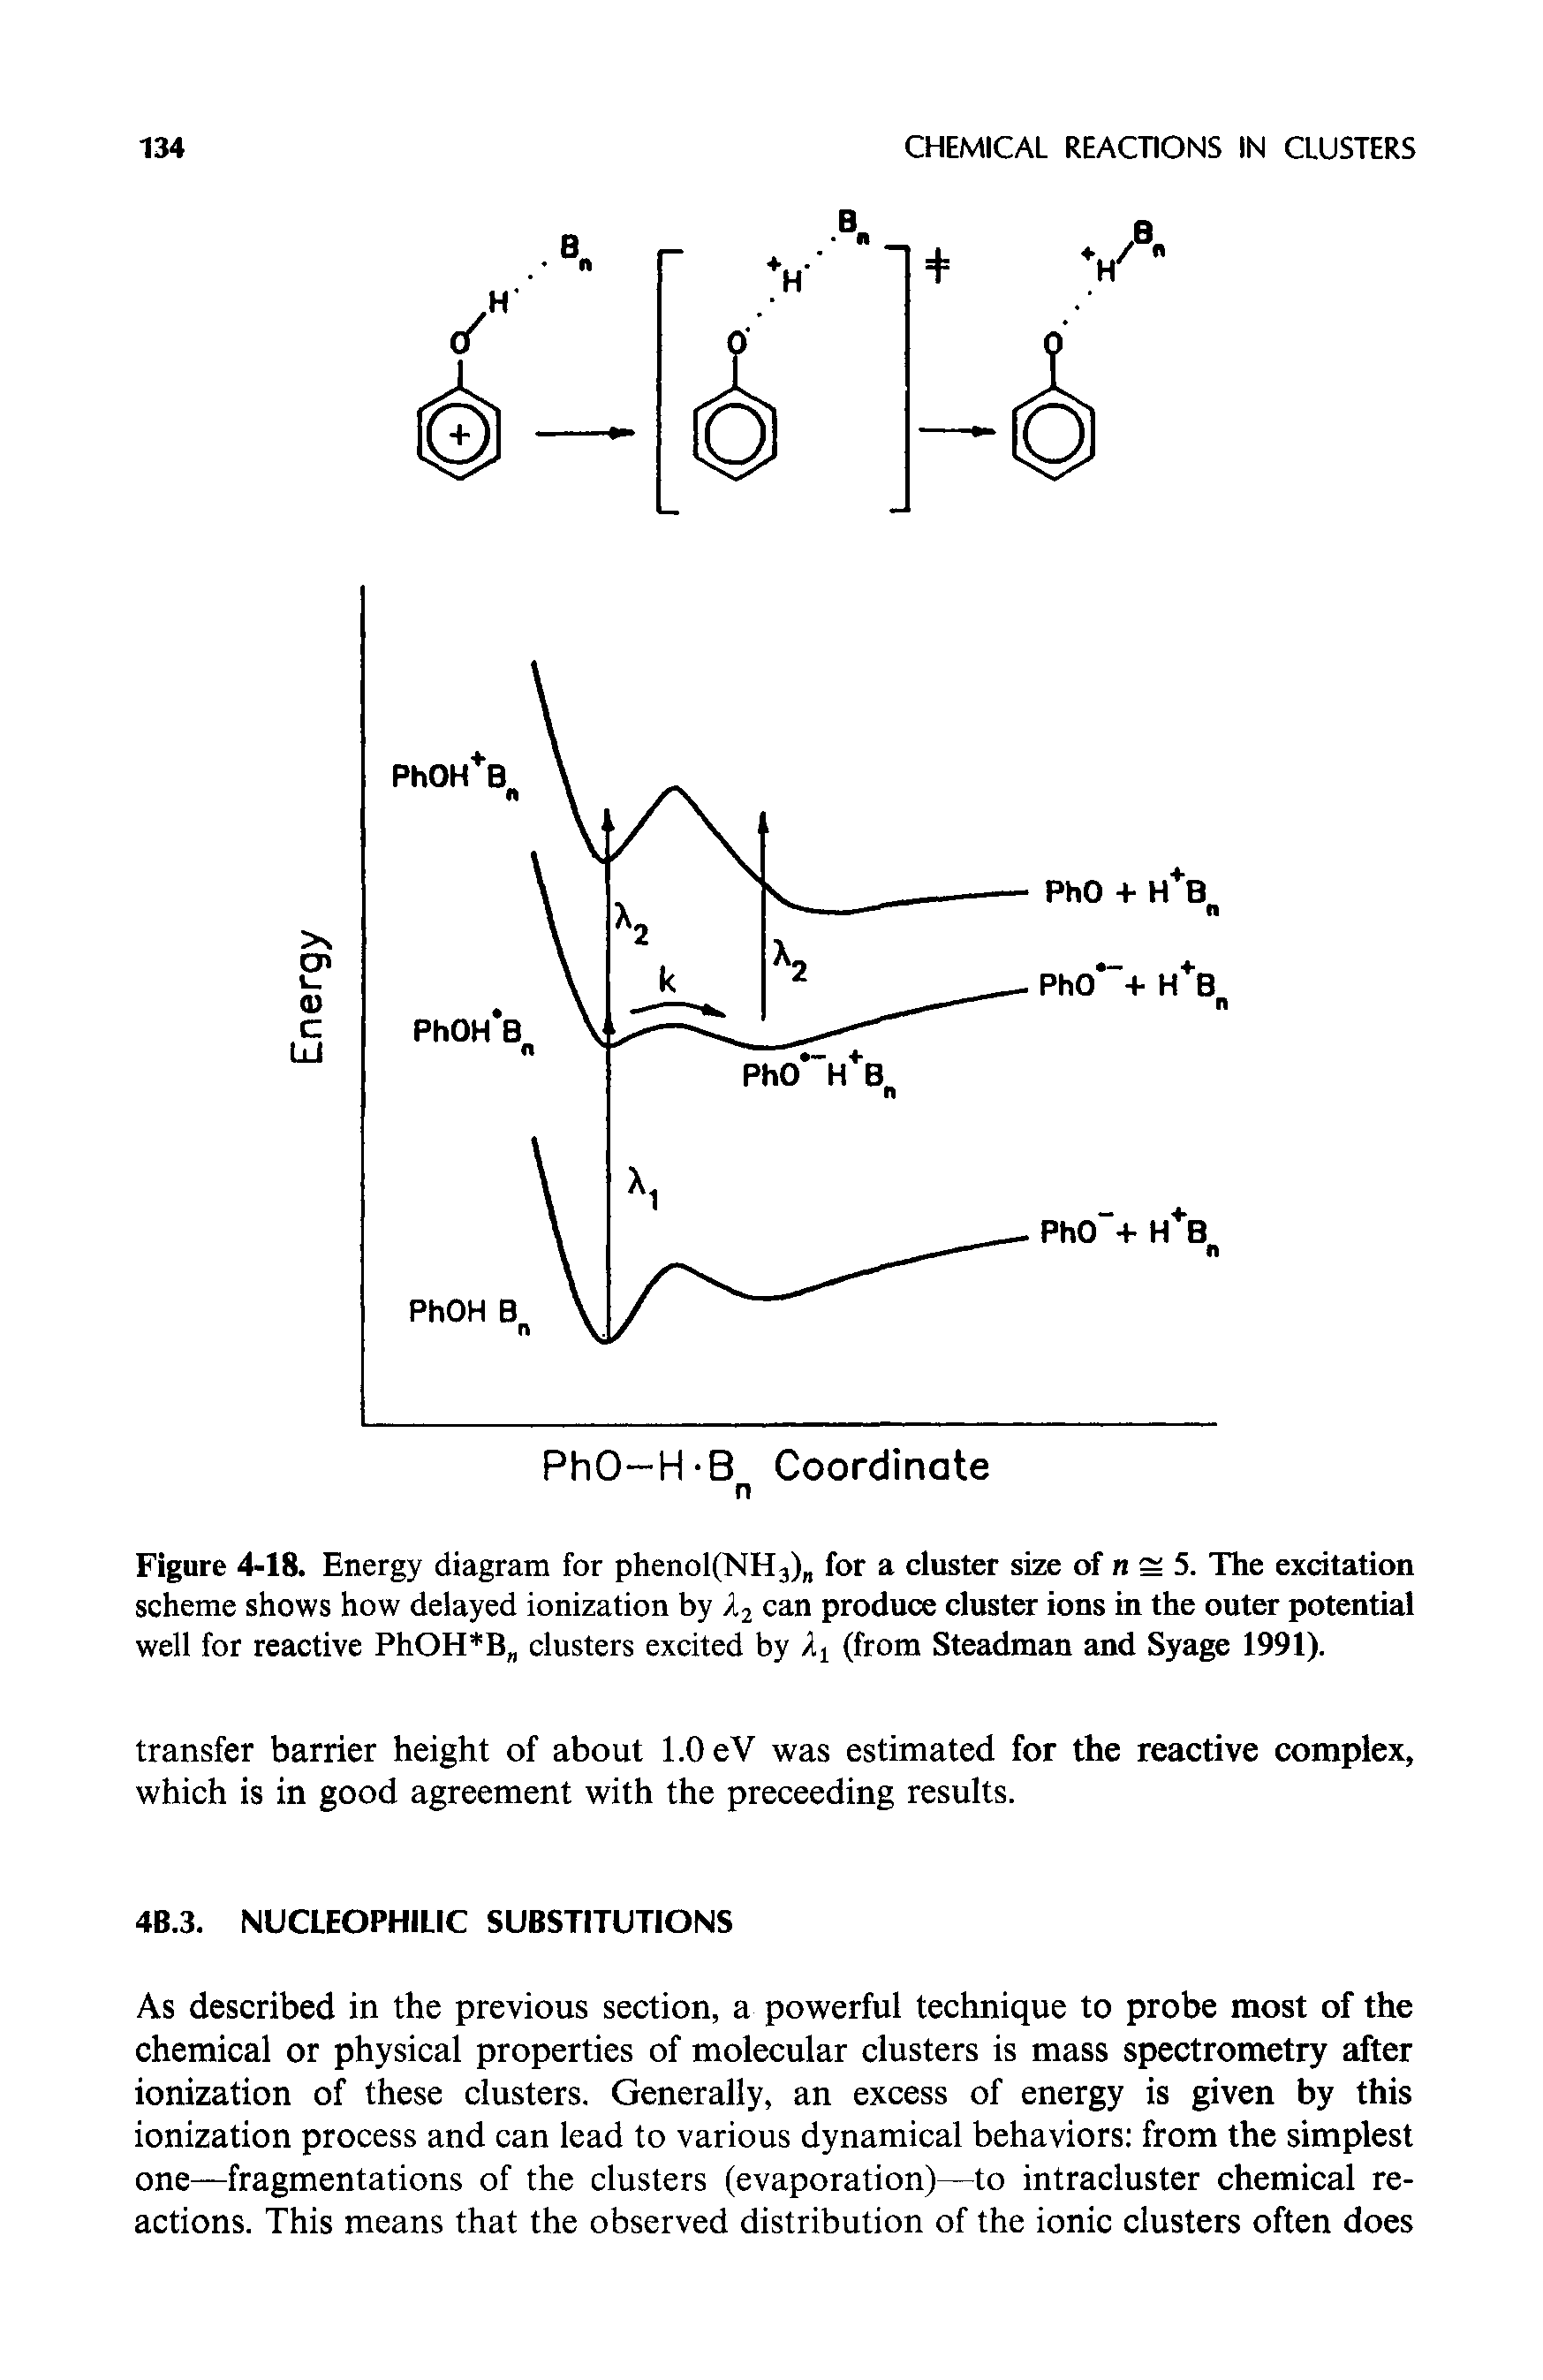 Figure 4-18. Energy diagram for phenol(NH3) for a cluster size of n s 5. The excitation scheme shows how delayed ionization by X2 can produce cluster ions in the outer potential well for reactive PhOH B clusters excited by ).y (from Steadman and Syage 1991).